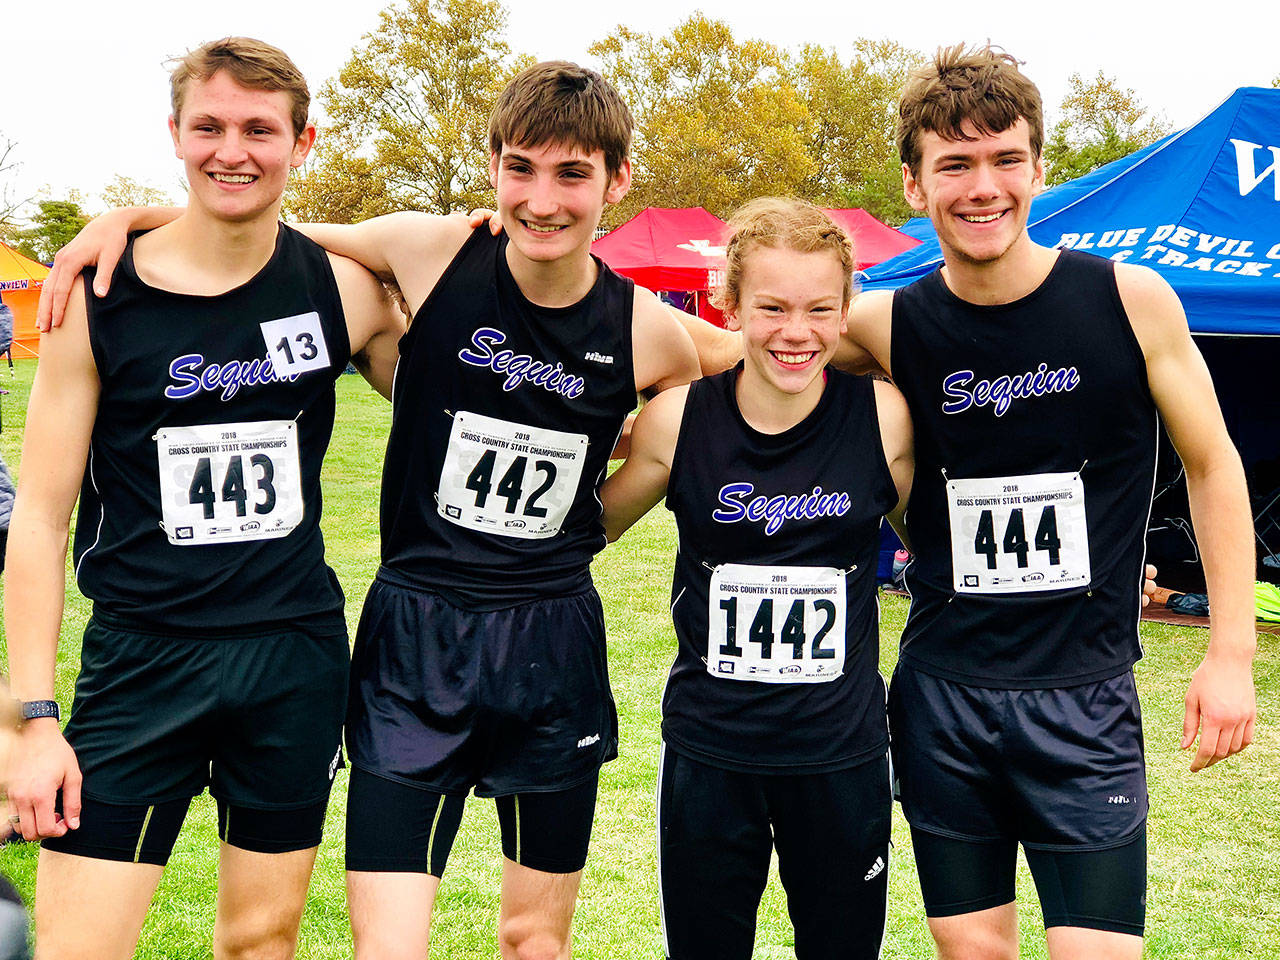 Sequim’s state 2A cross country competitors share smiles after completing the 5,000 meters at Sun Willows Golf Course in Pasco on Nov. 3. They include, from left, Murray Bingham, Jazen Bartee, Riley Pyeatt and Liam Byrne. Photo courtesy of Tracie Pyeatt